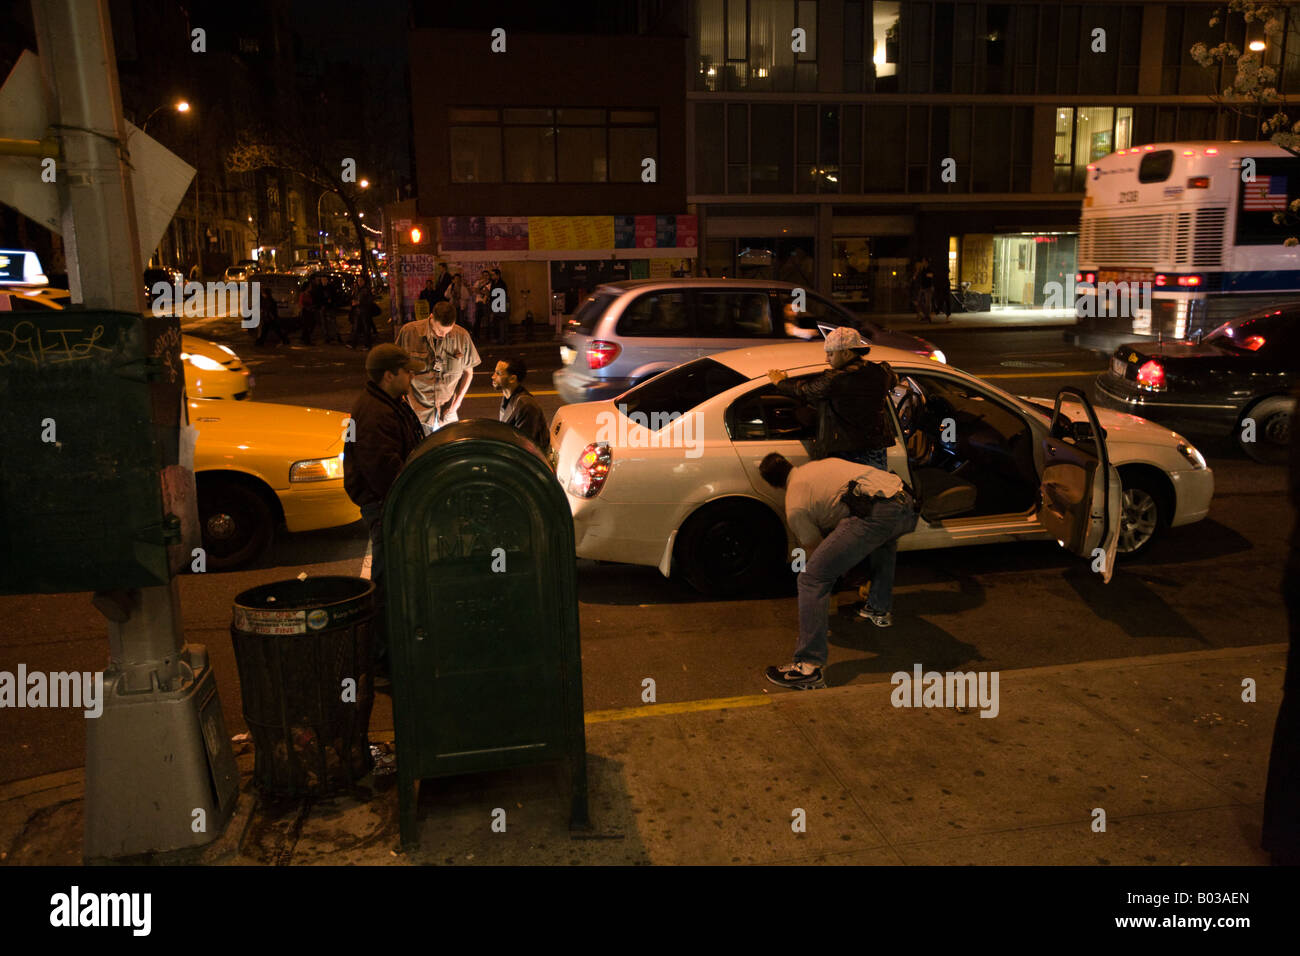 Undercover Police in Yellow NYC Taxi Cab searching two young felons, caught Downtown Manhattan, NY, USA Stock Photo